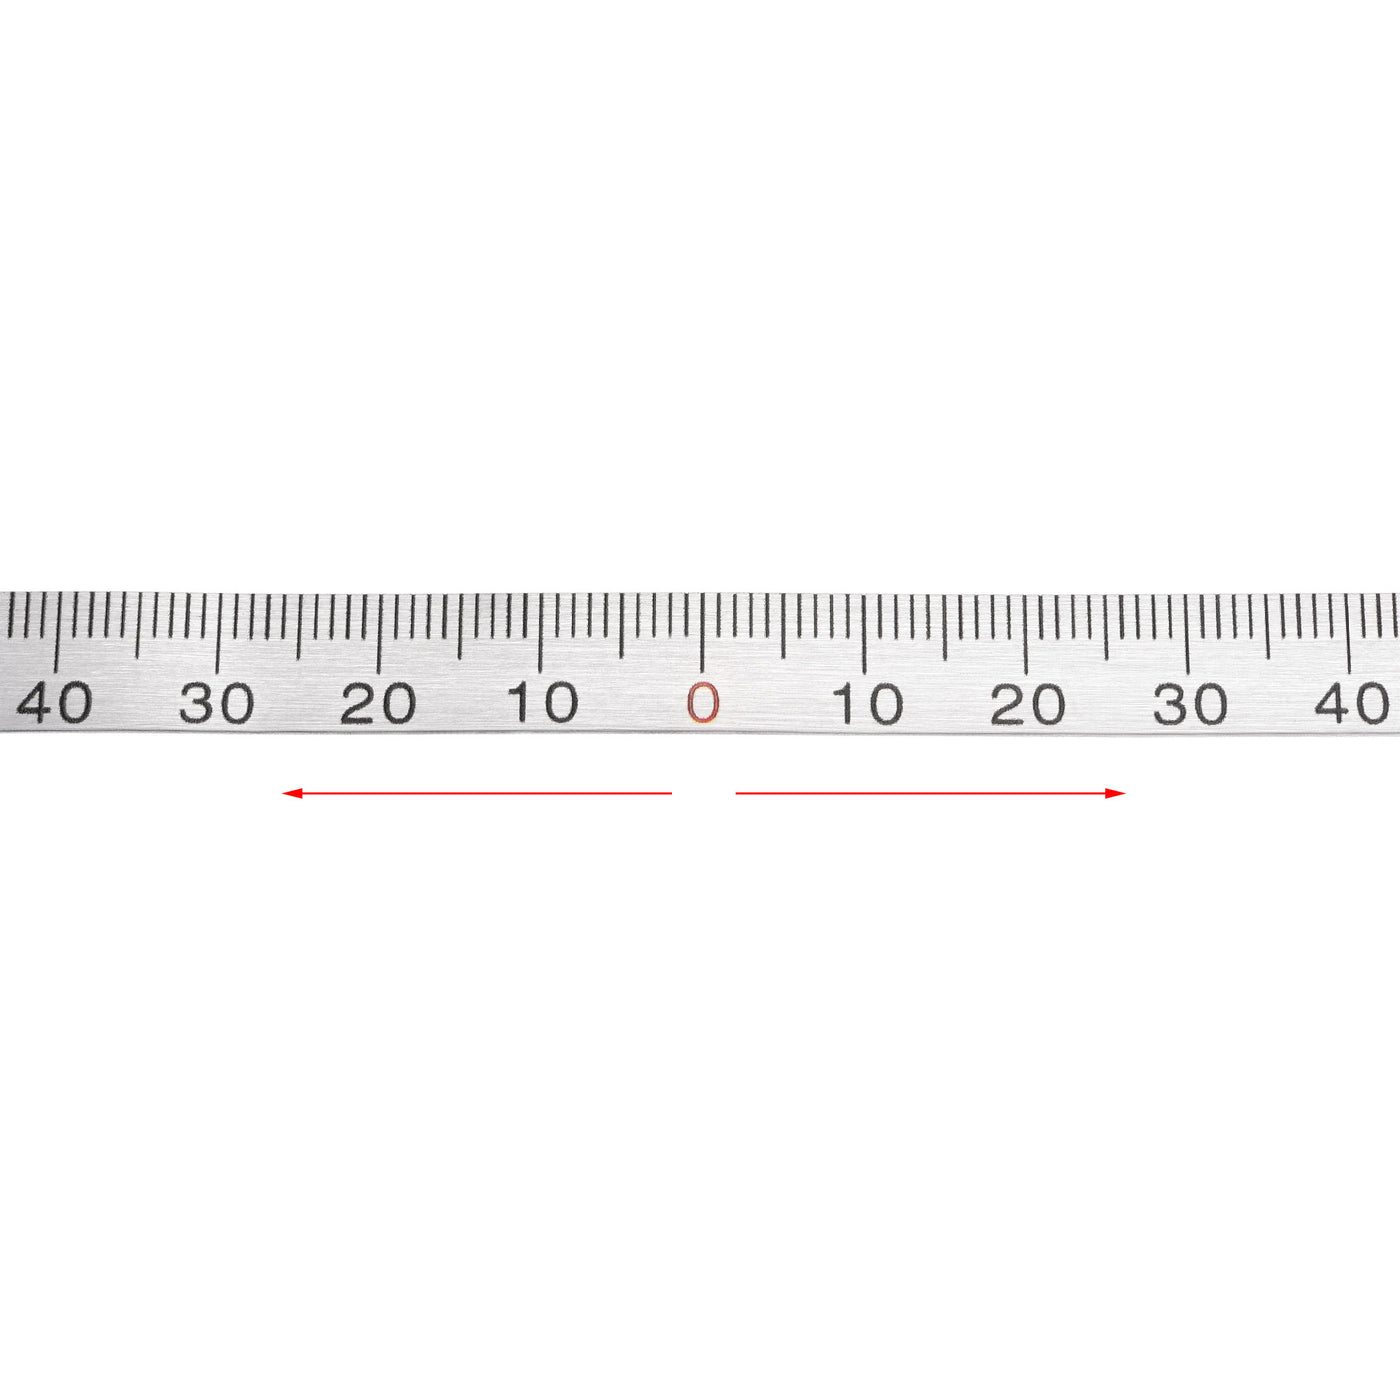 uxcell Uxcell Center Finding Ruler 50mm-0-50mm Table Sticky Adhesive Tape Measure Ruler, Aluminum Track Ruler with Holes, (from the middle).